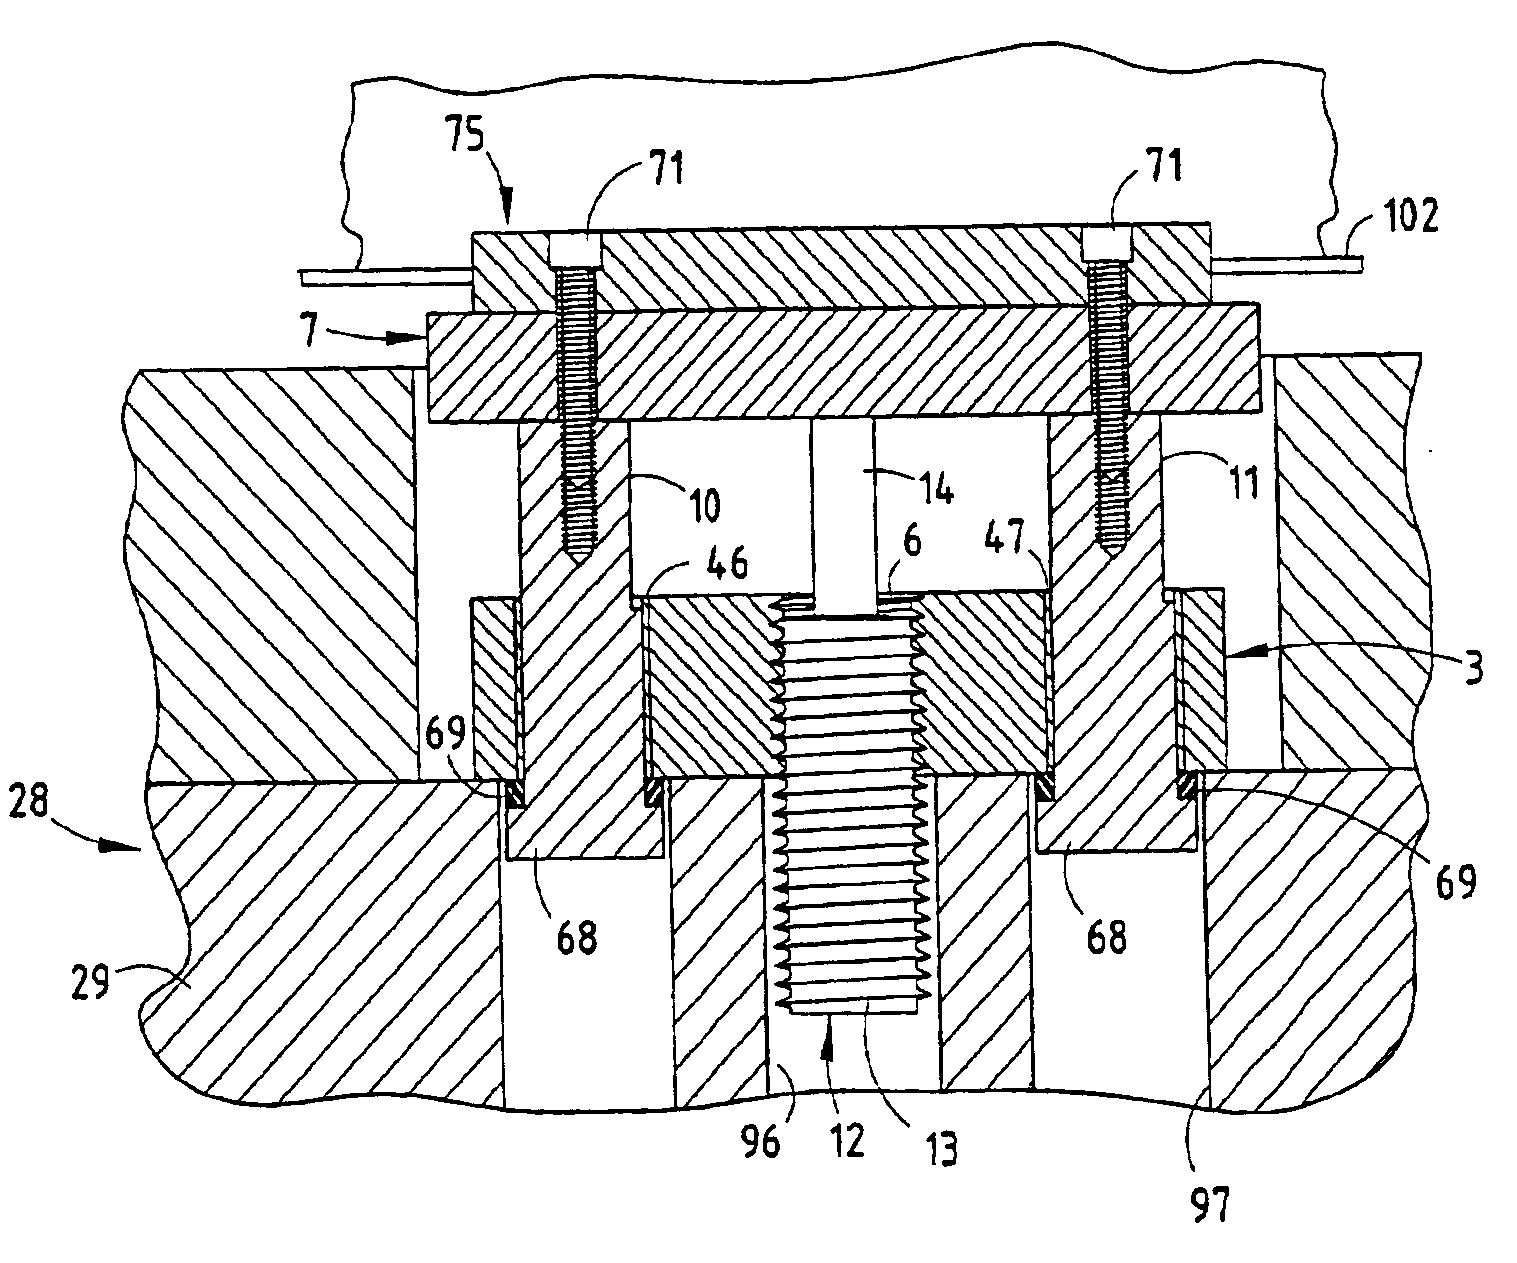 Stock lifter for metal forming dies and method for making the same